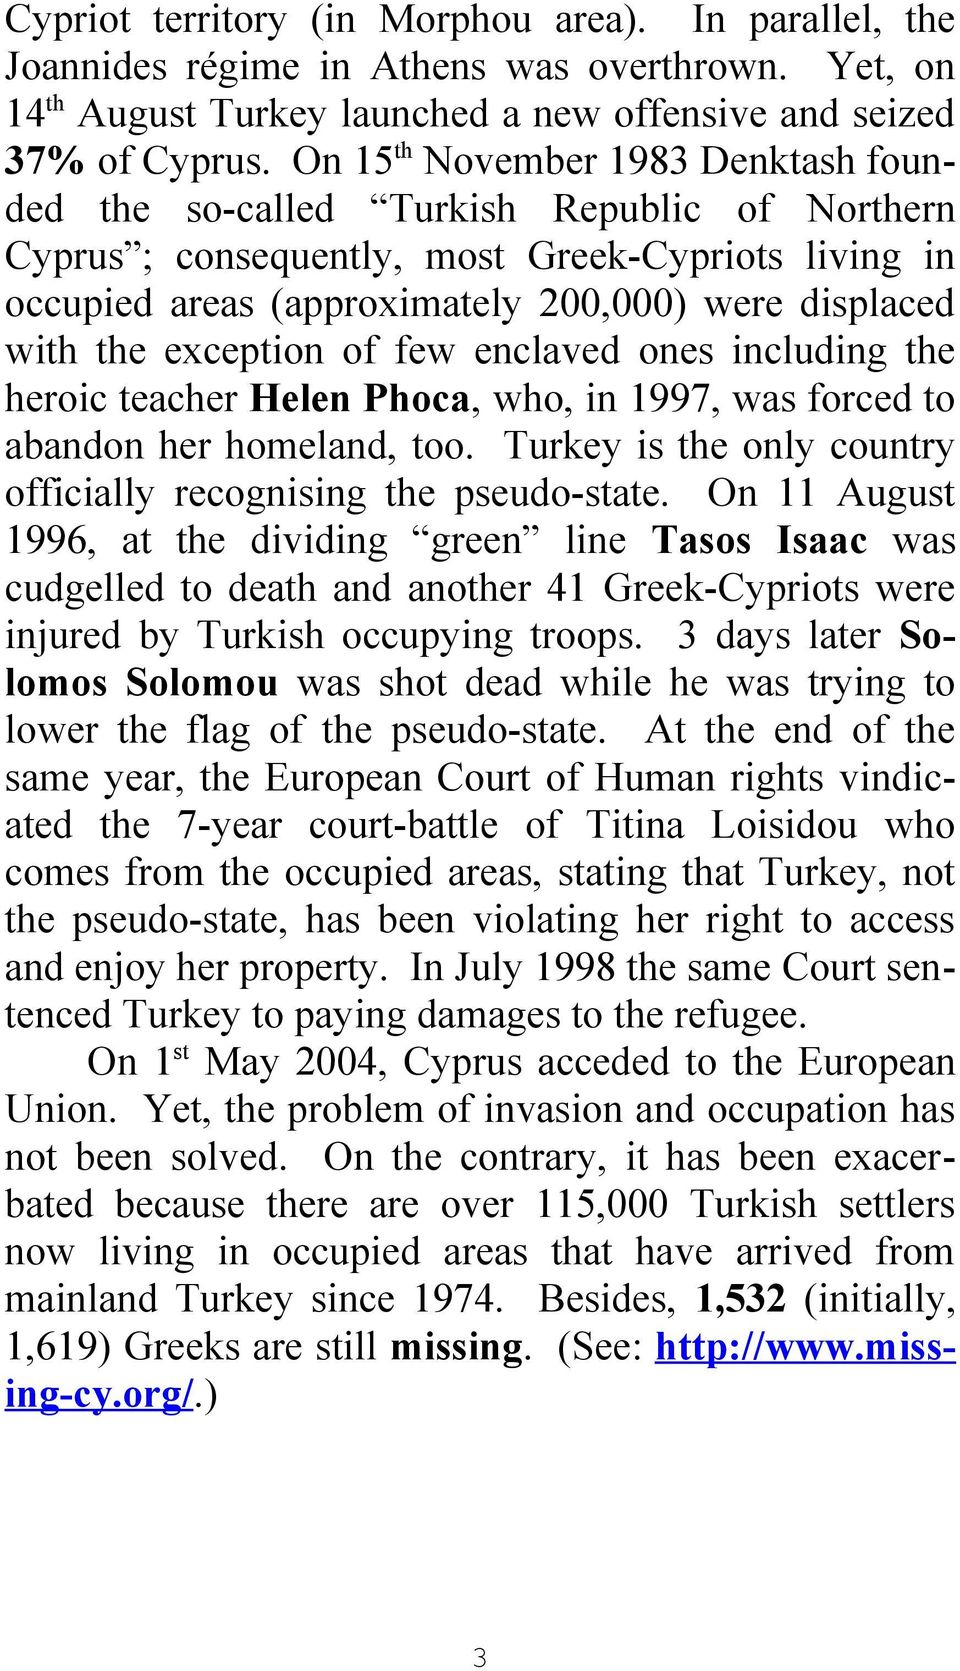 exception of few enclaved ones including the heroic teacher Helen Phoca, who, in 1997, was forced to abandon her homeland, too. Turkey is the only country officially recognising the pseudo-state.